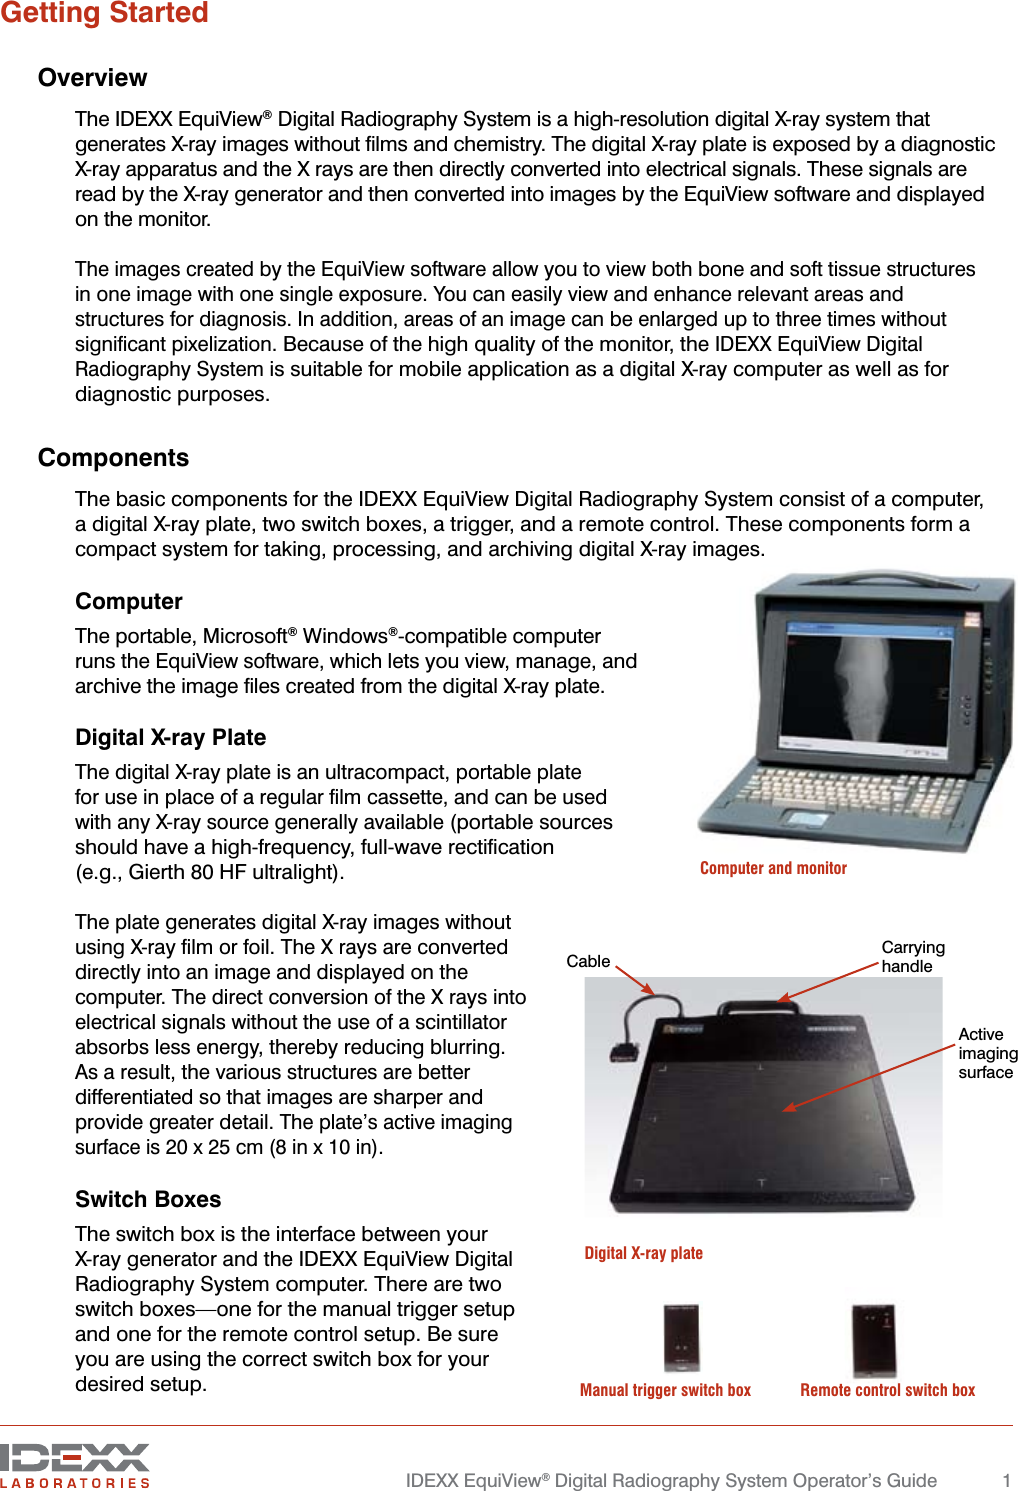   IDEXX EquiView® Digital Radiography System Operator’s Guide  1Getting StartedOverviewThe IDEXX EquiView® Digital Radiography System is a high-resolution digital X-ray system that generates X-ray images without ﬁlms and chemistry. The digital X-ray plate is exposed by a diagnostic X-ray apparatus and the X rays are then directly converted into electrical signals. These signals are read by the X-ray generator and then converted into images by the EquiView software and displayed on the monitor. The images created by the EquiView software allow you to view both bone and soft tissue structures  in one image with one single exposure. You can easily view and enhance relevant areas and  structures for diagnosis. In addition, areas of an image can be enlarged up to three times without signiﬁcant pixelization. Because of the high quality of the monitor, the IDEXX EquiView Digital Radiography System is suitable for mobile application as a digital X-ray computer as well as for diagnostic purposes.ComponentsThe basic components for the IDEXX EquiView Digital Radiography System consist of a computer, a digital X-ray plate, two switch boxes, a trigger, and a remote control. These components form a compact system for taking, processing, and archiving digital X-ray images. ComputerThe portable, Microsoft® Windows®-compatible computer runs the EquiView software, which lets you view, manage, and archive the image ﬁles created from the digital X-ray plate.Digital X-ray PlateThe digital X-ray plate is an ultracompact, portable plate for use in place of a regular ﬁlm cassette, and can be used with any X-ray source generally available (portable sources should have a high-frequency, full-wave rectiﬁcation  (e.g., Gierth 80 HF ultralight). The plate generates digital X-ray images without using X-ray ﬁlm or foil. The X rays are converted directly into an image and displayed on the computer. The direct conversion of the X rays into electrical signals without the use of a scintillator absorbs less energy, thereby reducing blurring. As a result, the various structures are better differentiated so that images are sharper and provide greater detail. The plate’s active imaging surface is 20 x 25 cm (8 in x 10 in). Switch BoxesThe switch box is the interface between your X-ray generator and the IDEXX EquiView Digital Radiography System computer. There are two switch boxes—one for the manual trigger setup and one for the remote control setup. Be sure  you are using the correct switch box for your desired setup.Computer and monitorCarrying handleCableActive imaging surfaceDigital X-ray plate Manual trigger switch box  Remote control switch box 